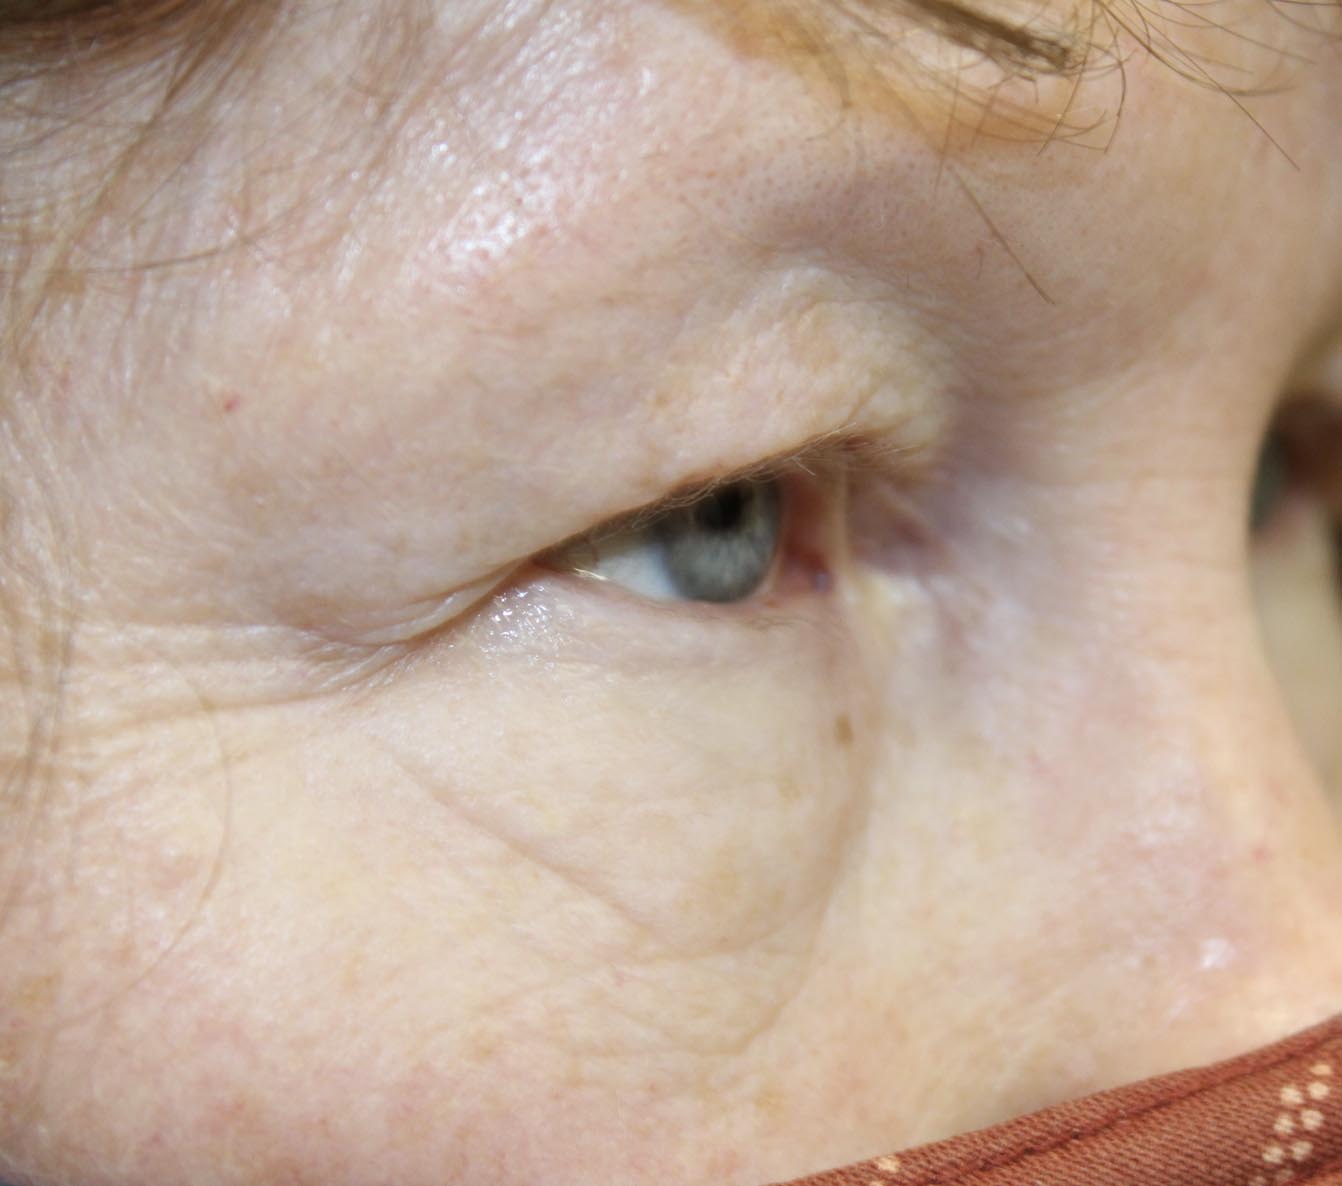 57 year old woman after blepharoplasty lower procedure